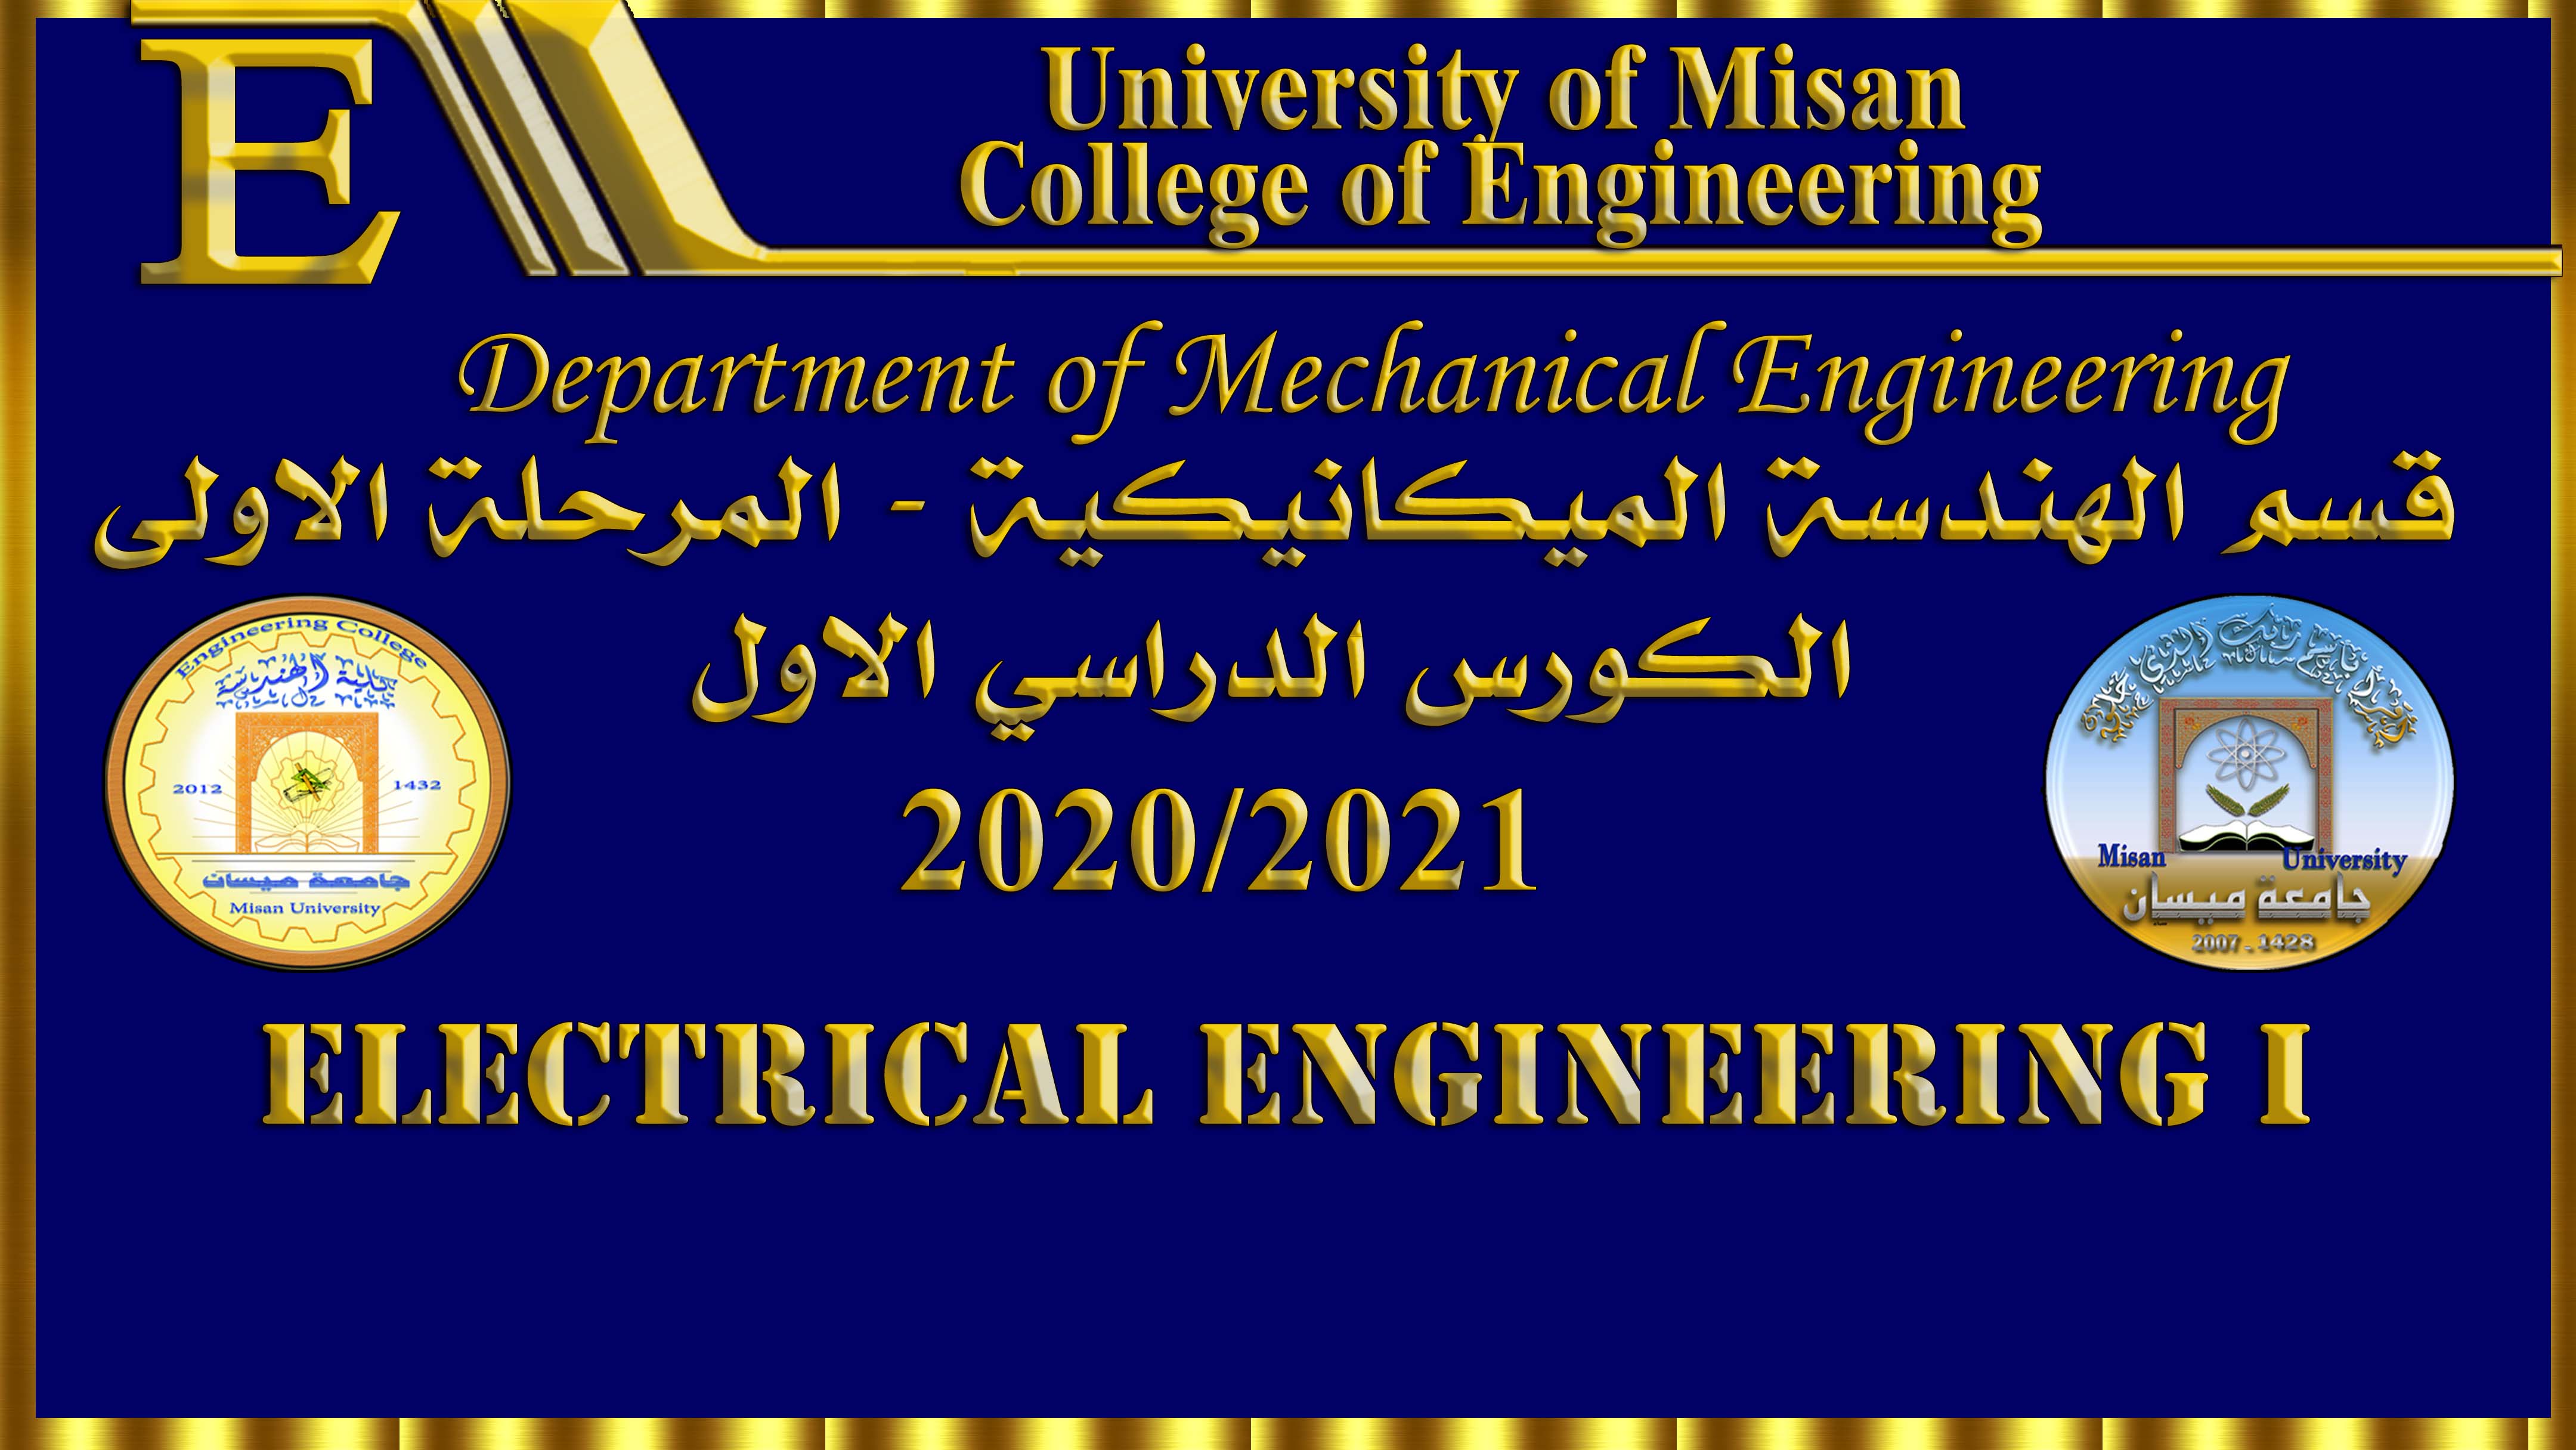 Electrical Engineering I